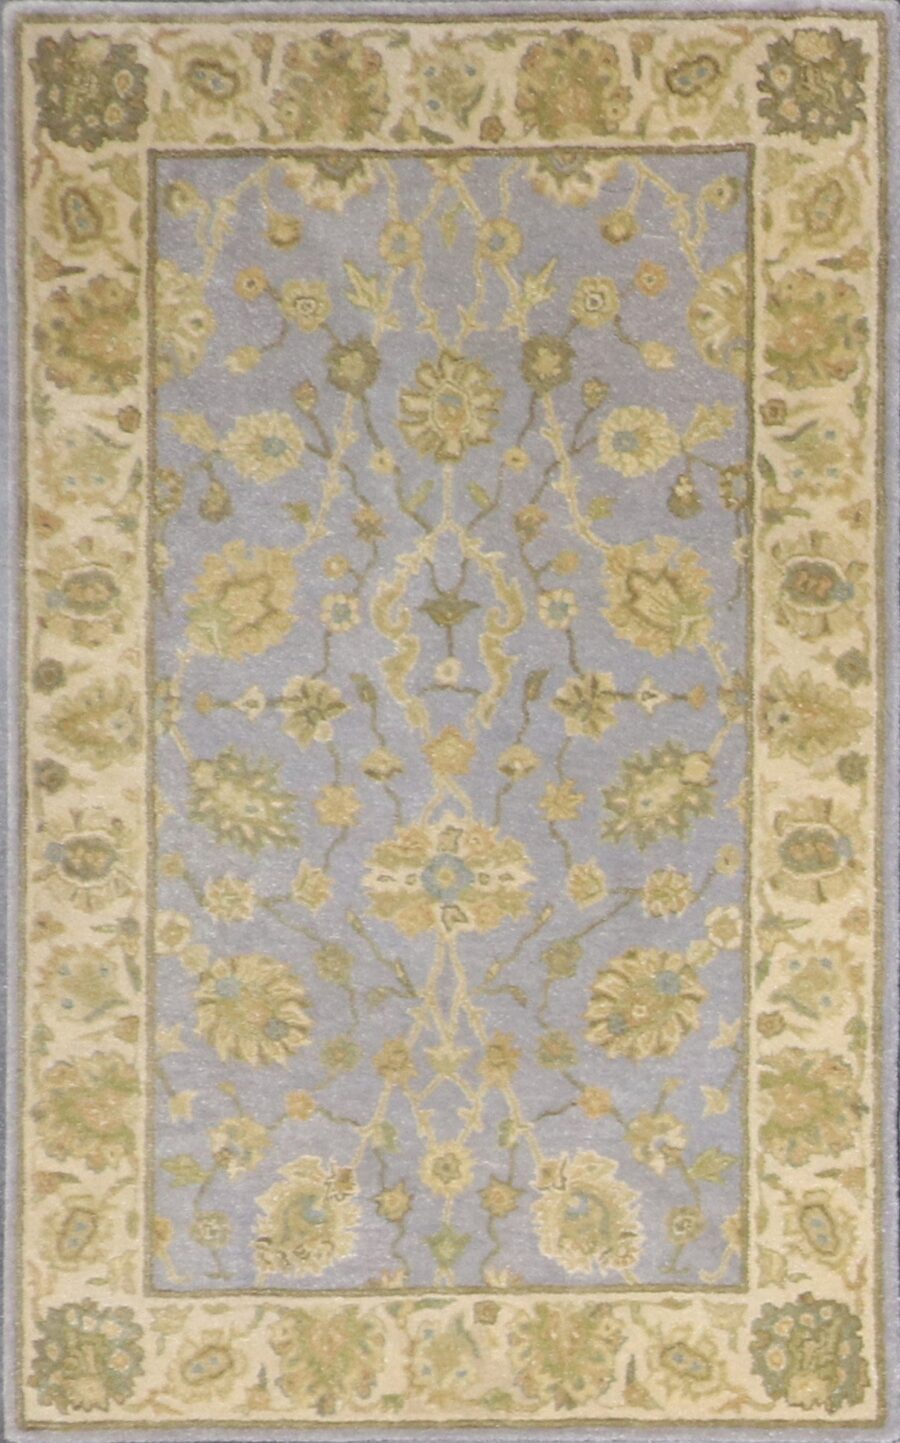 3’7”x5’6” Decorative Light Blue Wool Hand-Tufted Rug - Direct Rug Import | Rugs in Chicago, Indiana,South Bend,Granger